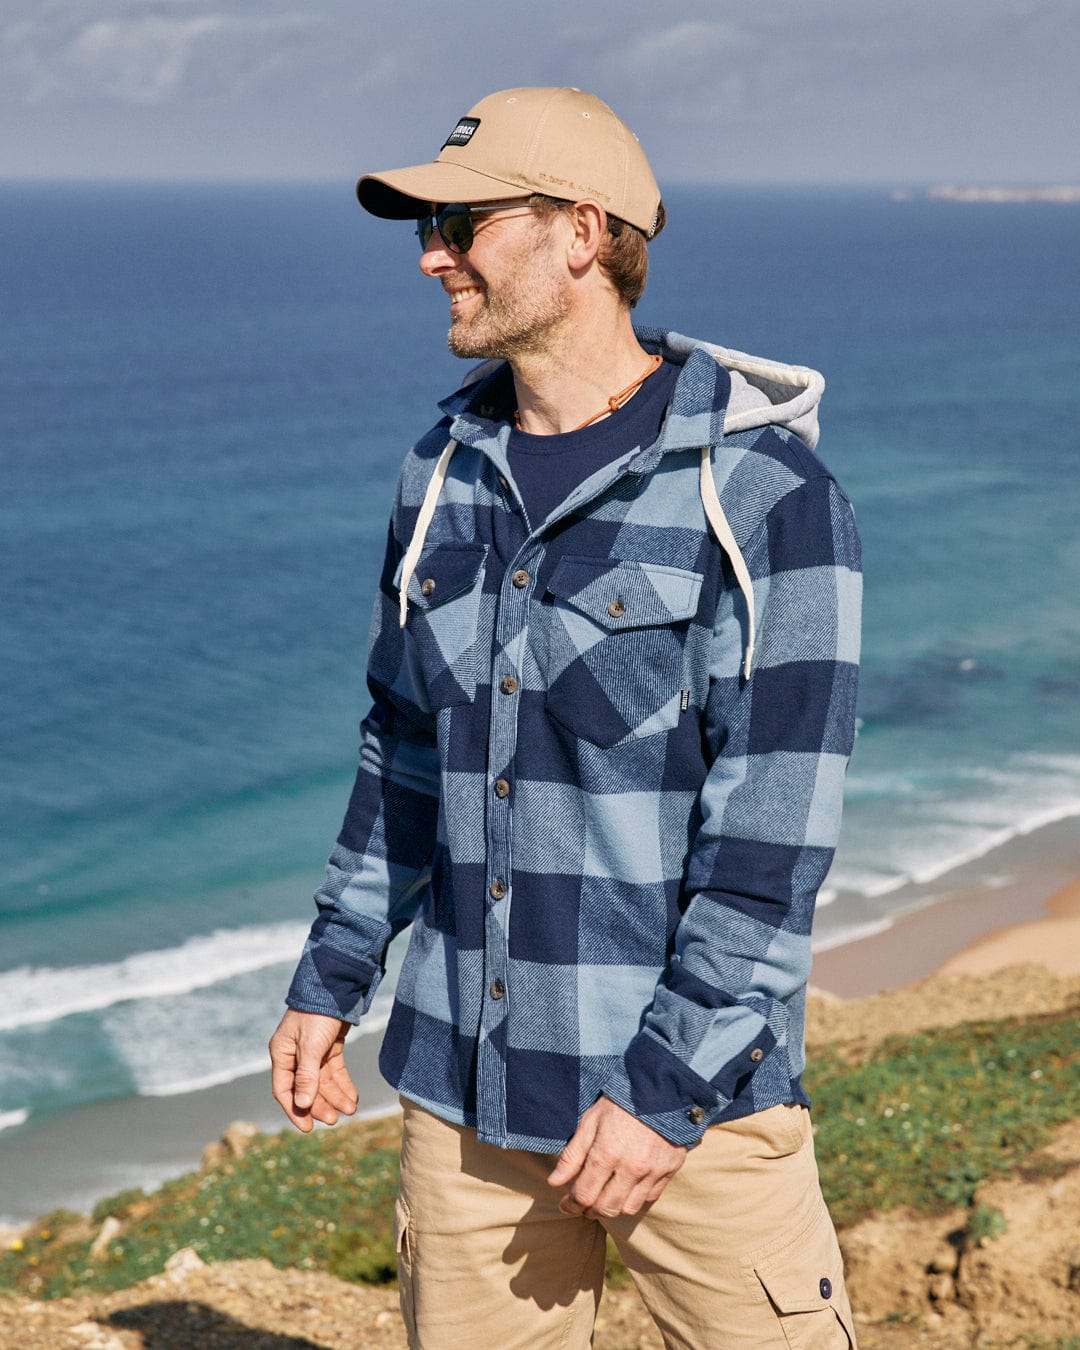 Man wearing a cap, Saltrock Beale - Mens Hooded Long Sleeve Shirt in Blue with a detachable hood, and sunglasses smiling while looking to the side, with a beach and the ocean in the background.